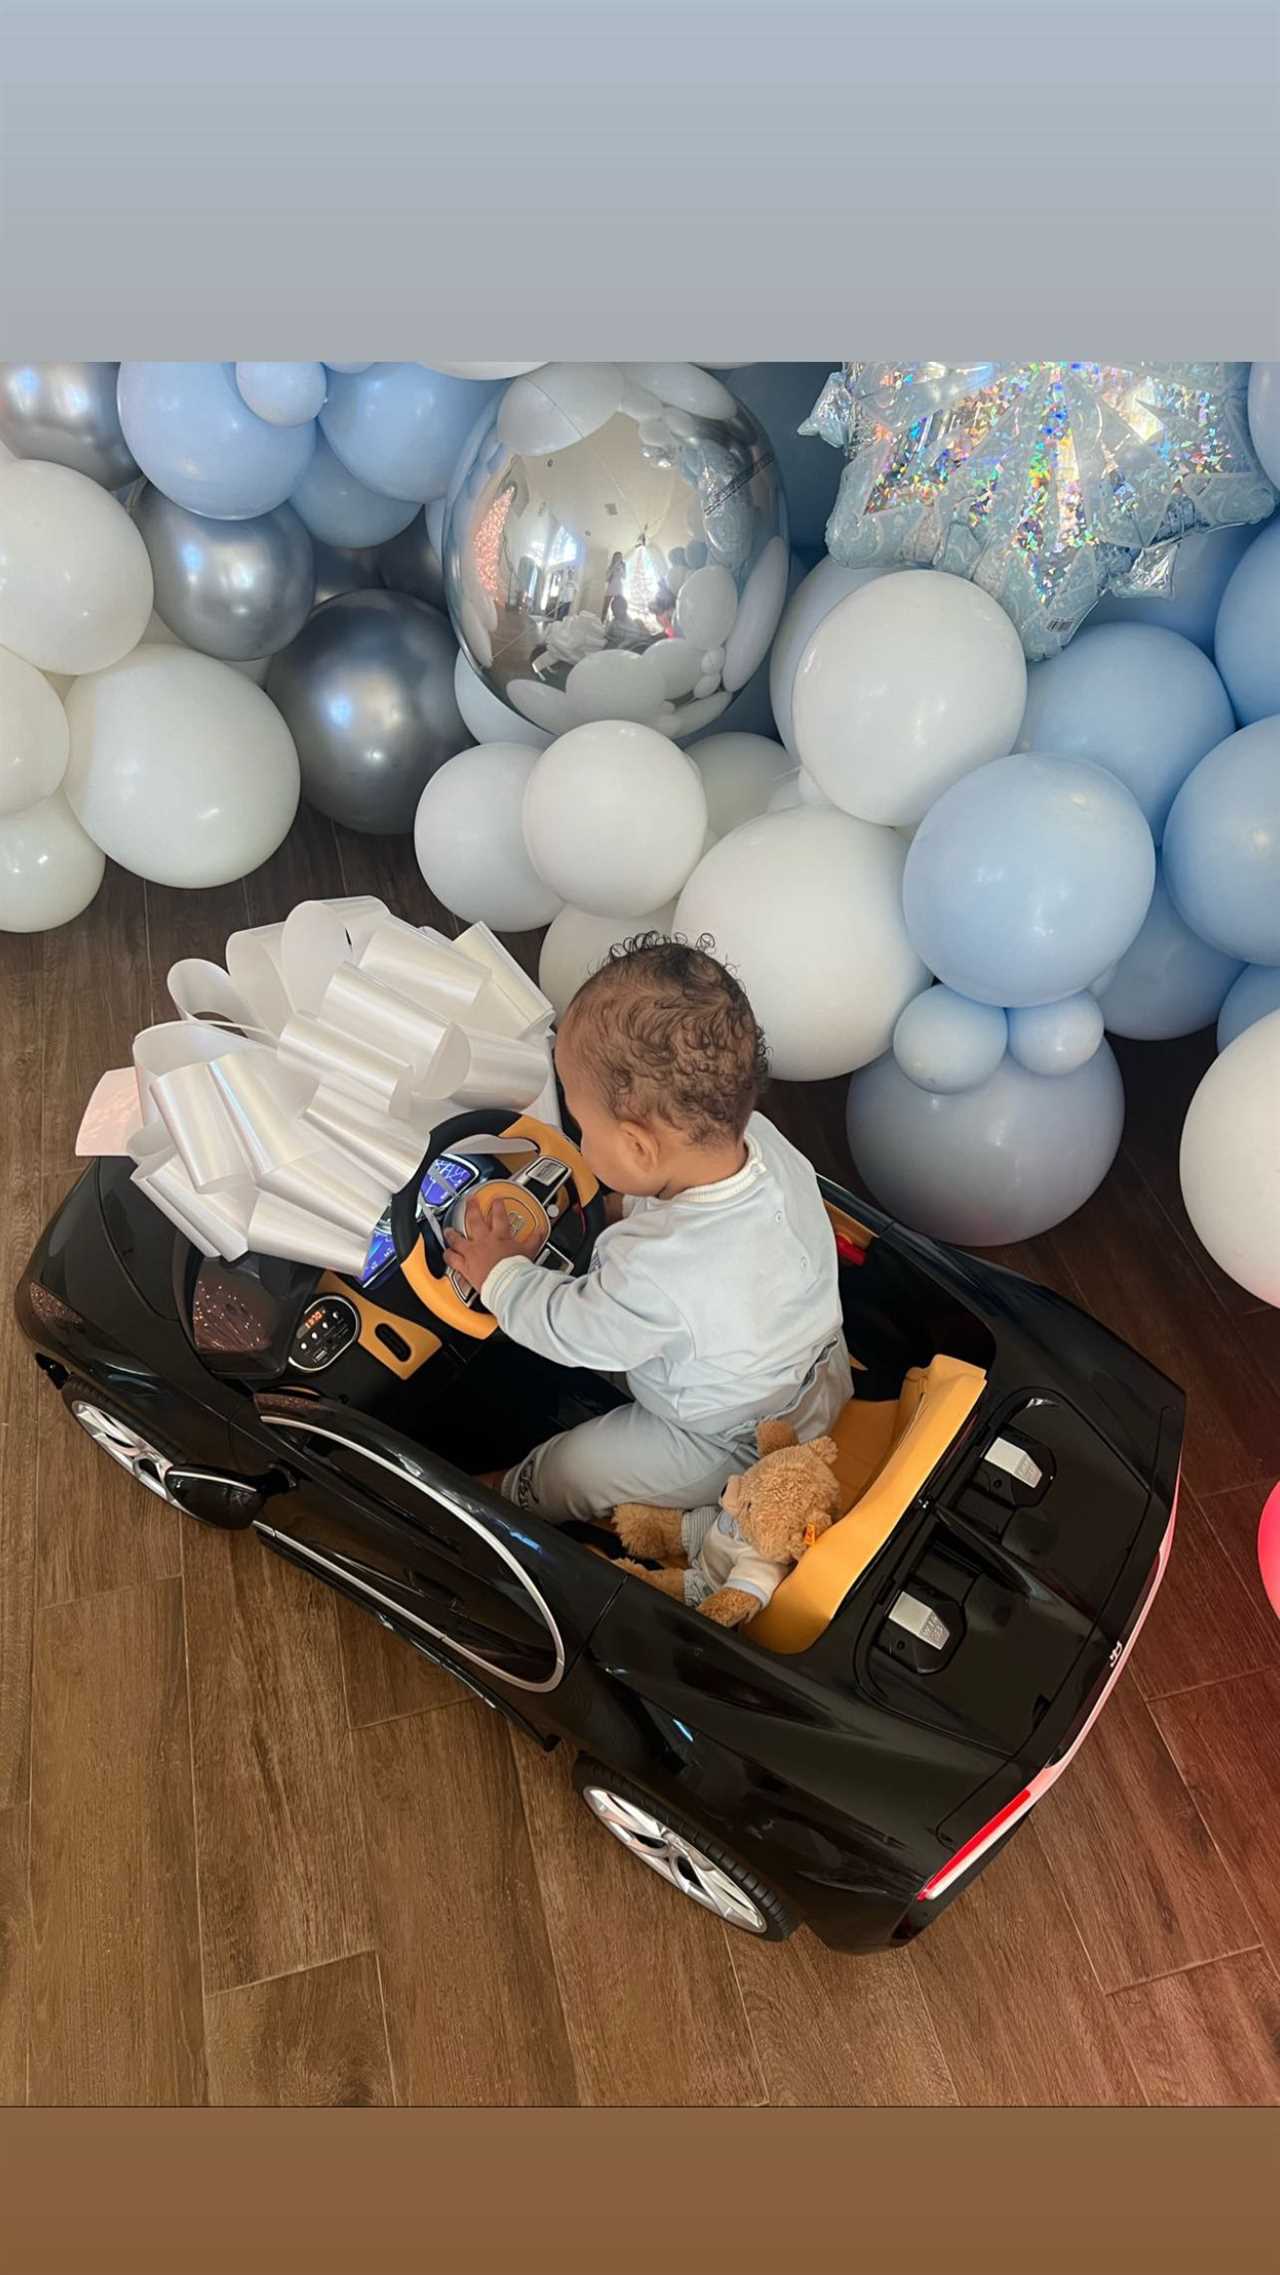 Tristan Thompson’s baby mama Maralee Nichols shares rare photos of son Theo at his 1st birthday party without NBA star